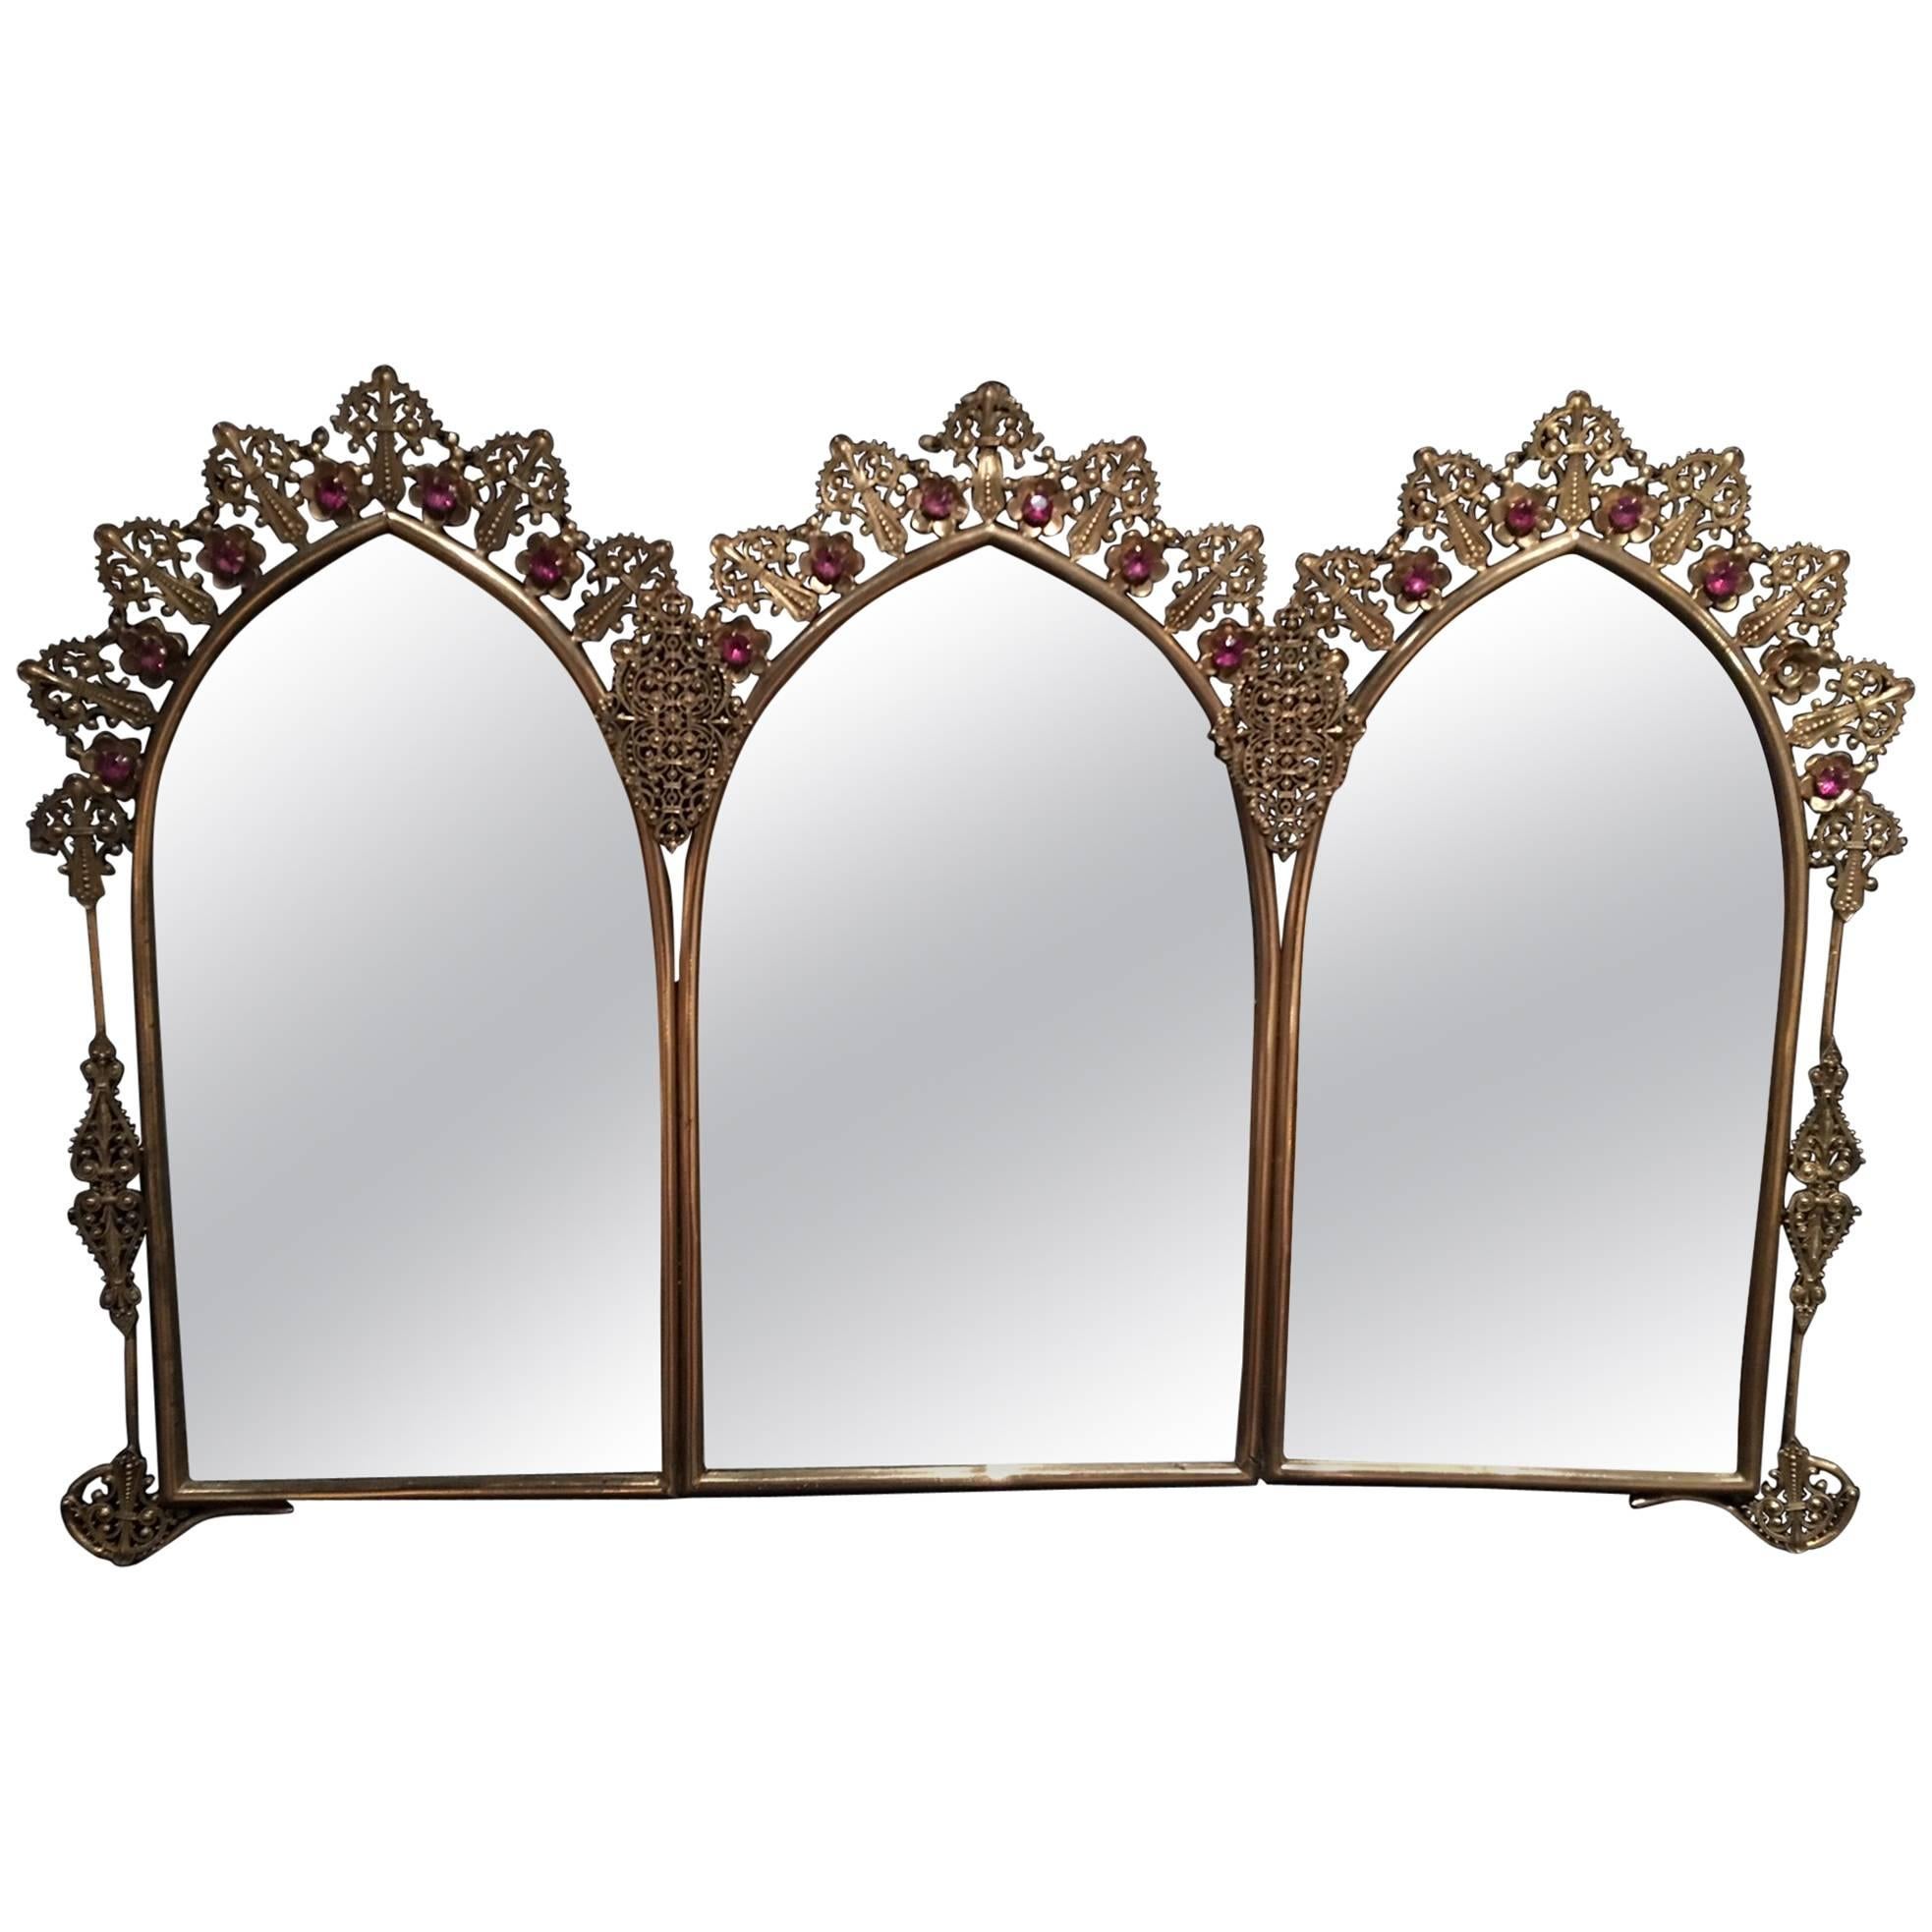 French Polished Brass Triple Mirror with Decorative Jewels, 19th Century